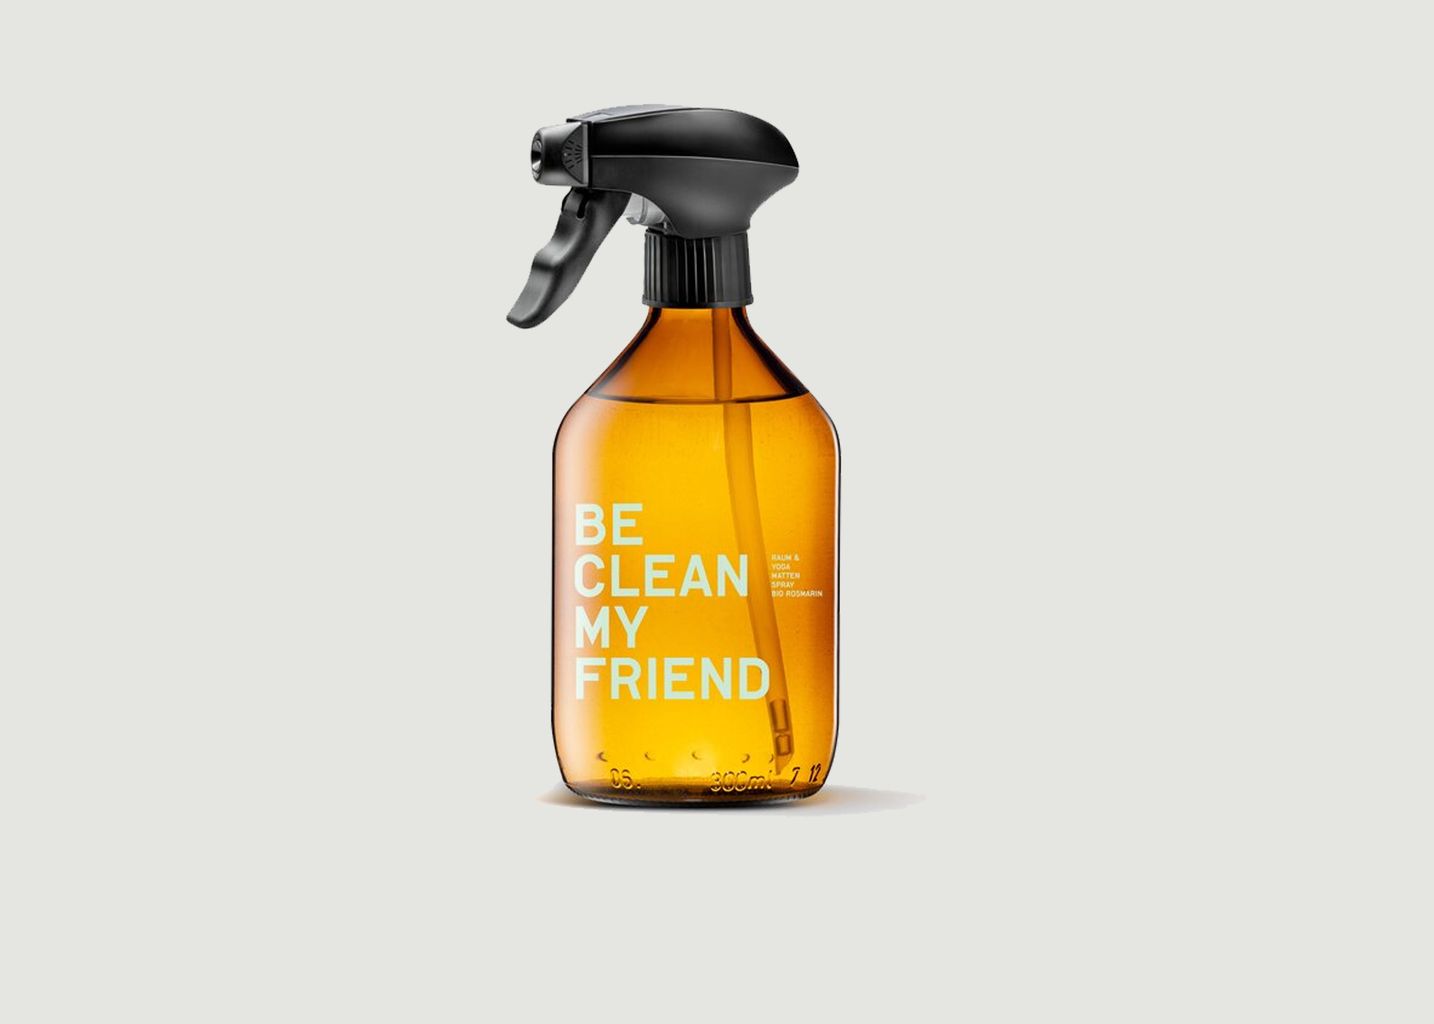 Apricot and rosemary indoor and yoga mat spray - 300 ml - Be Soap My Friend